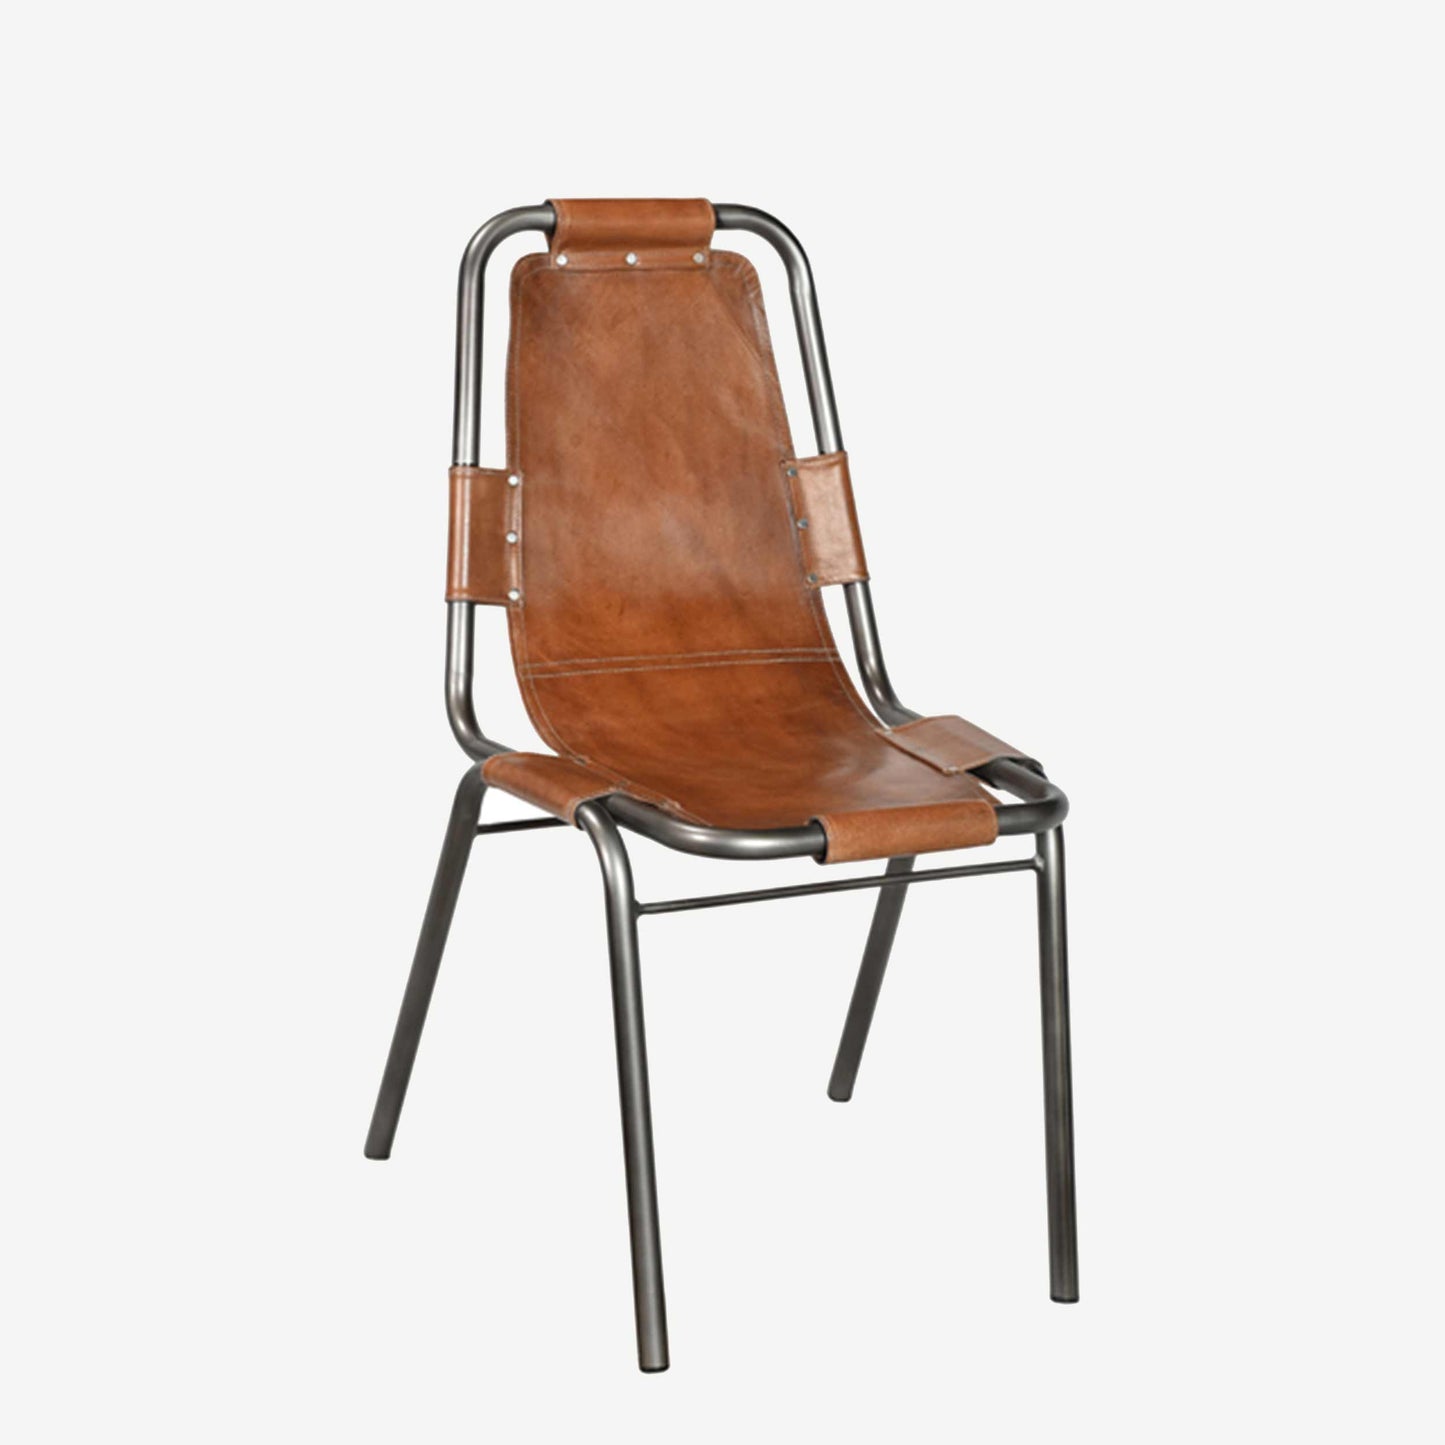 The Arc Leather Chair